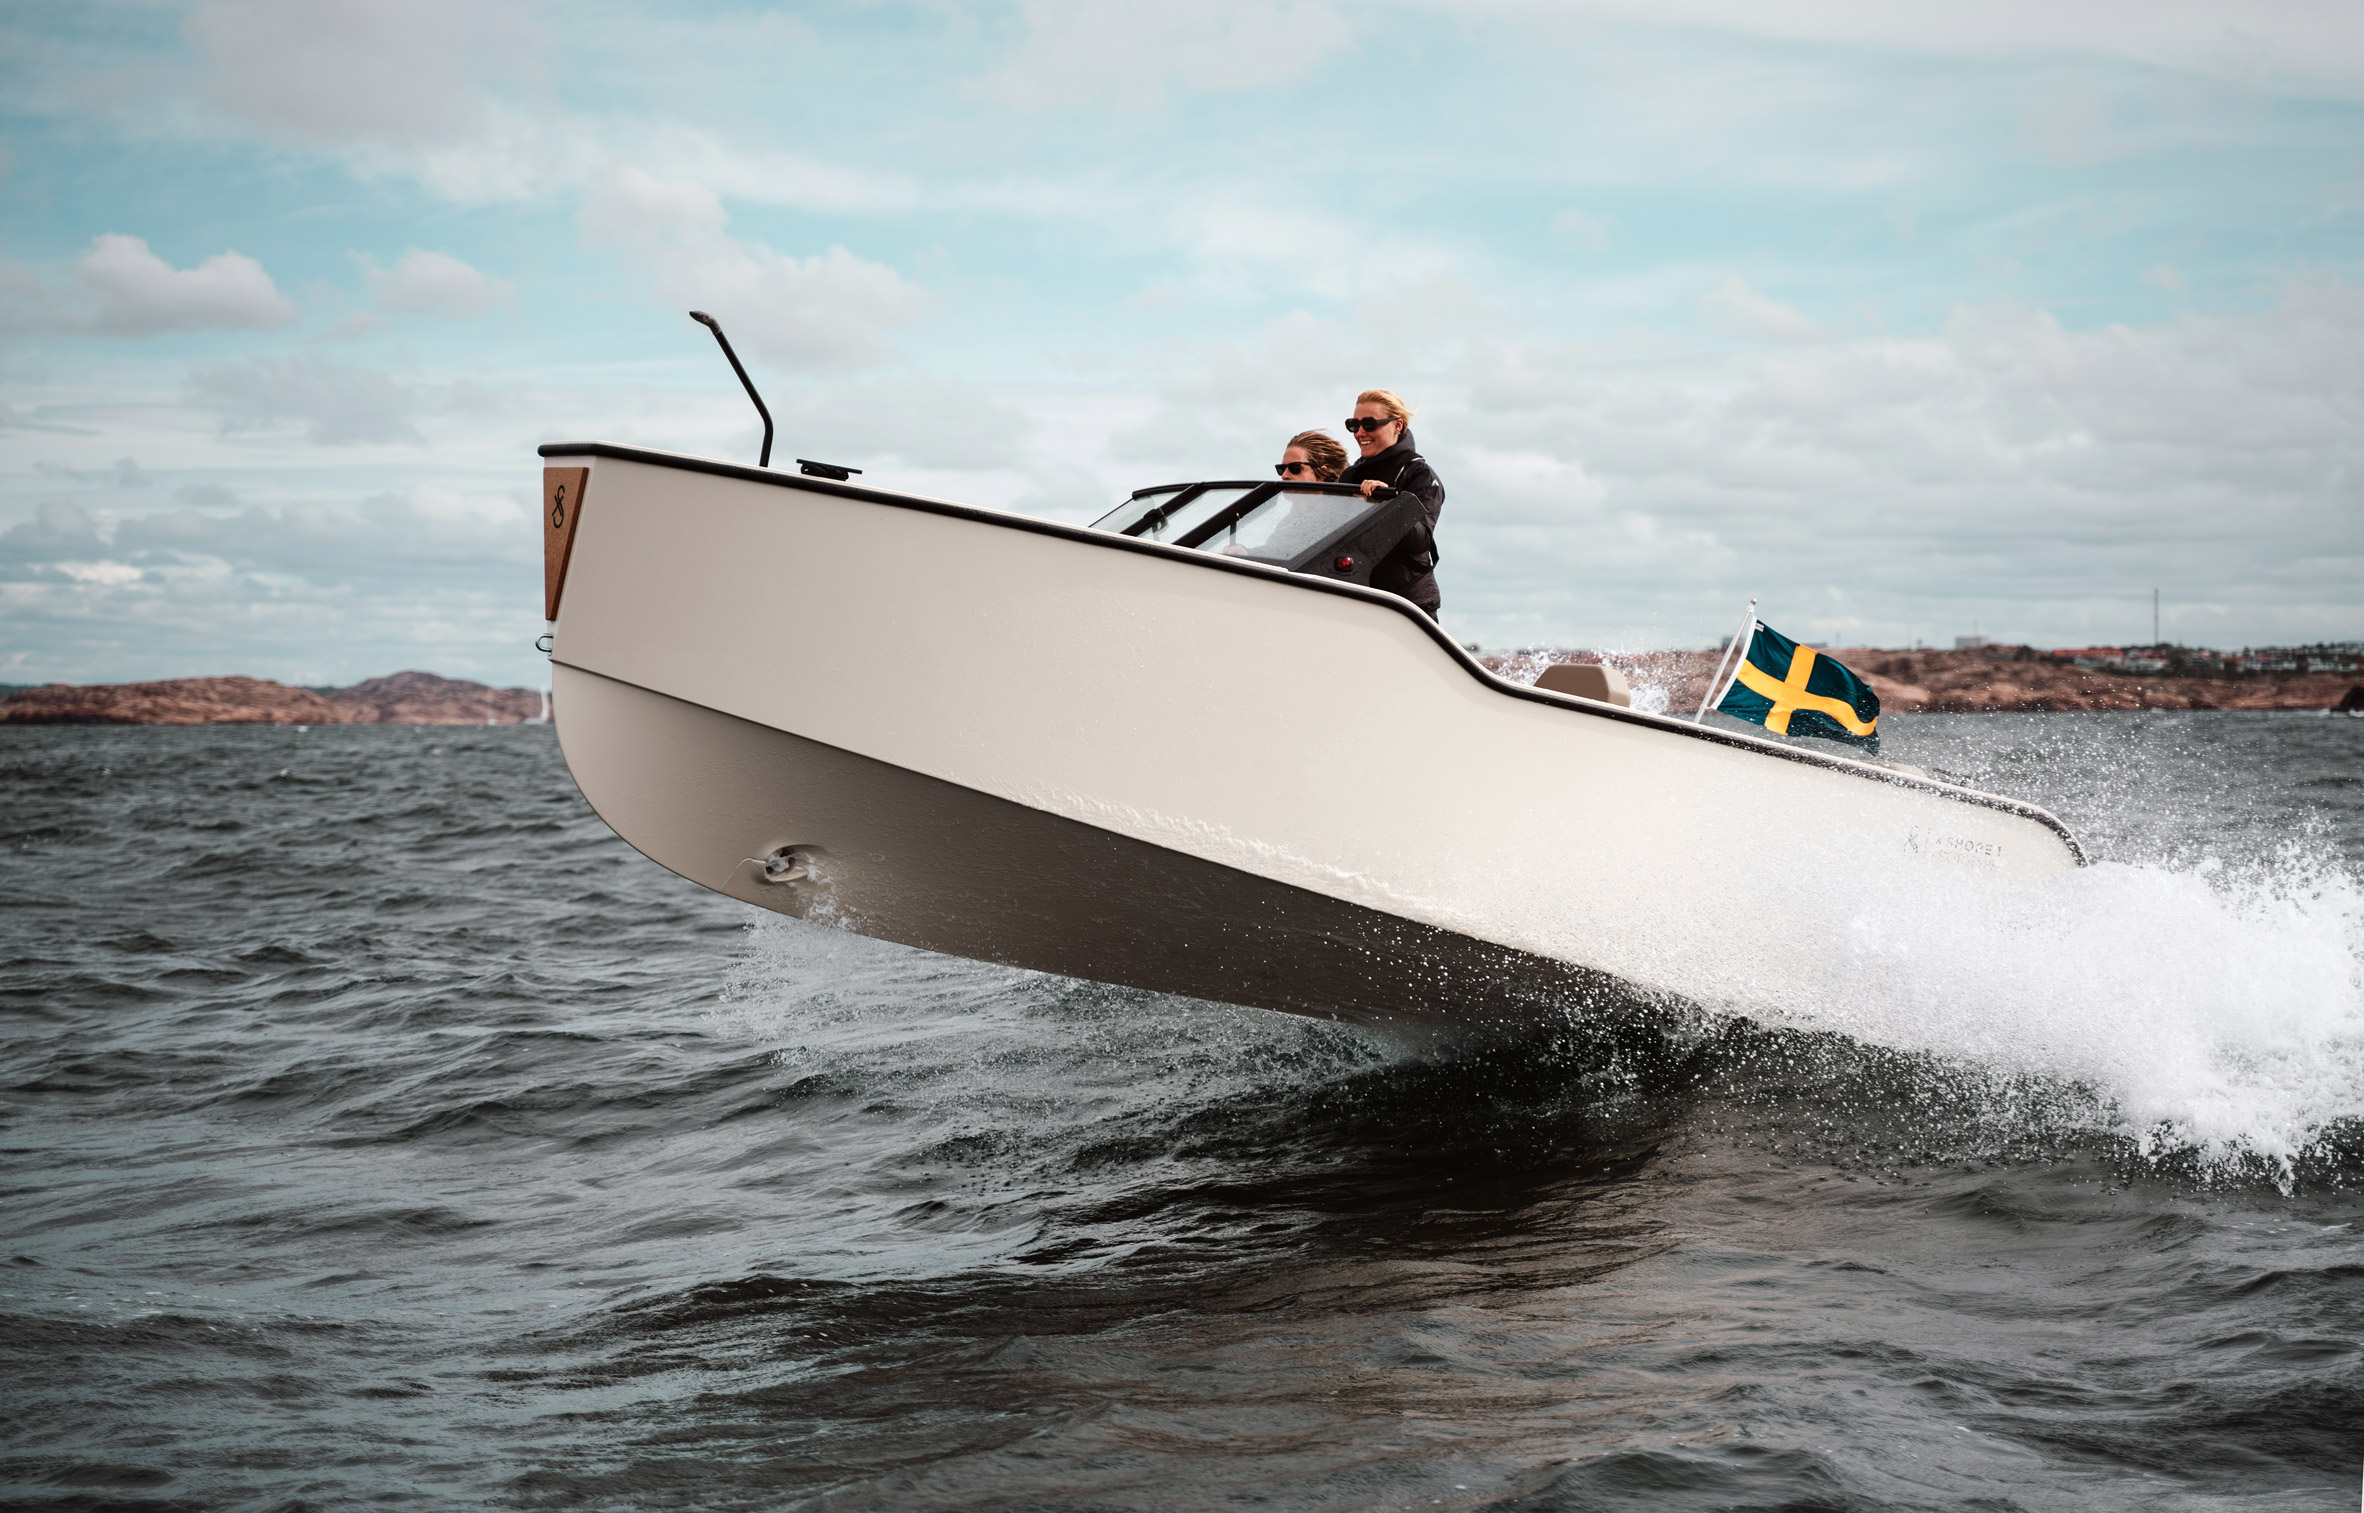 Small white electric boat glides at full speed over a wave in the sea